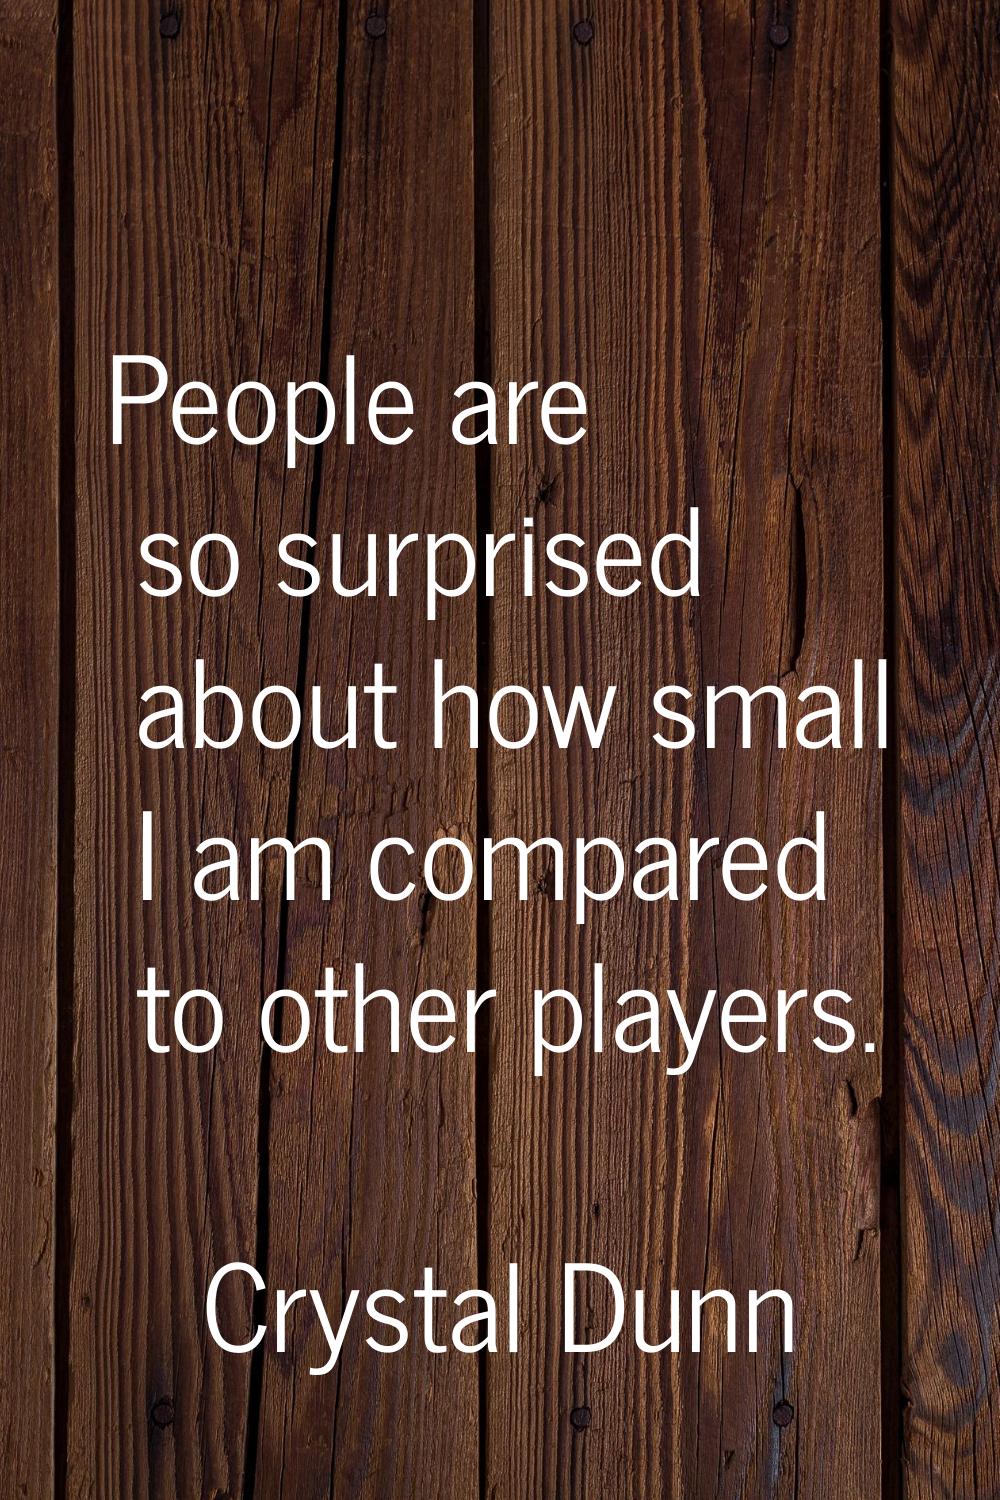 People are so surprised about how small I am compared to other players.